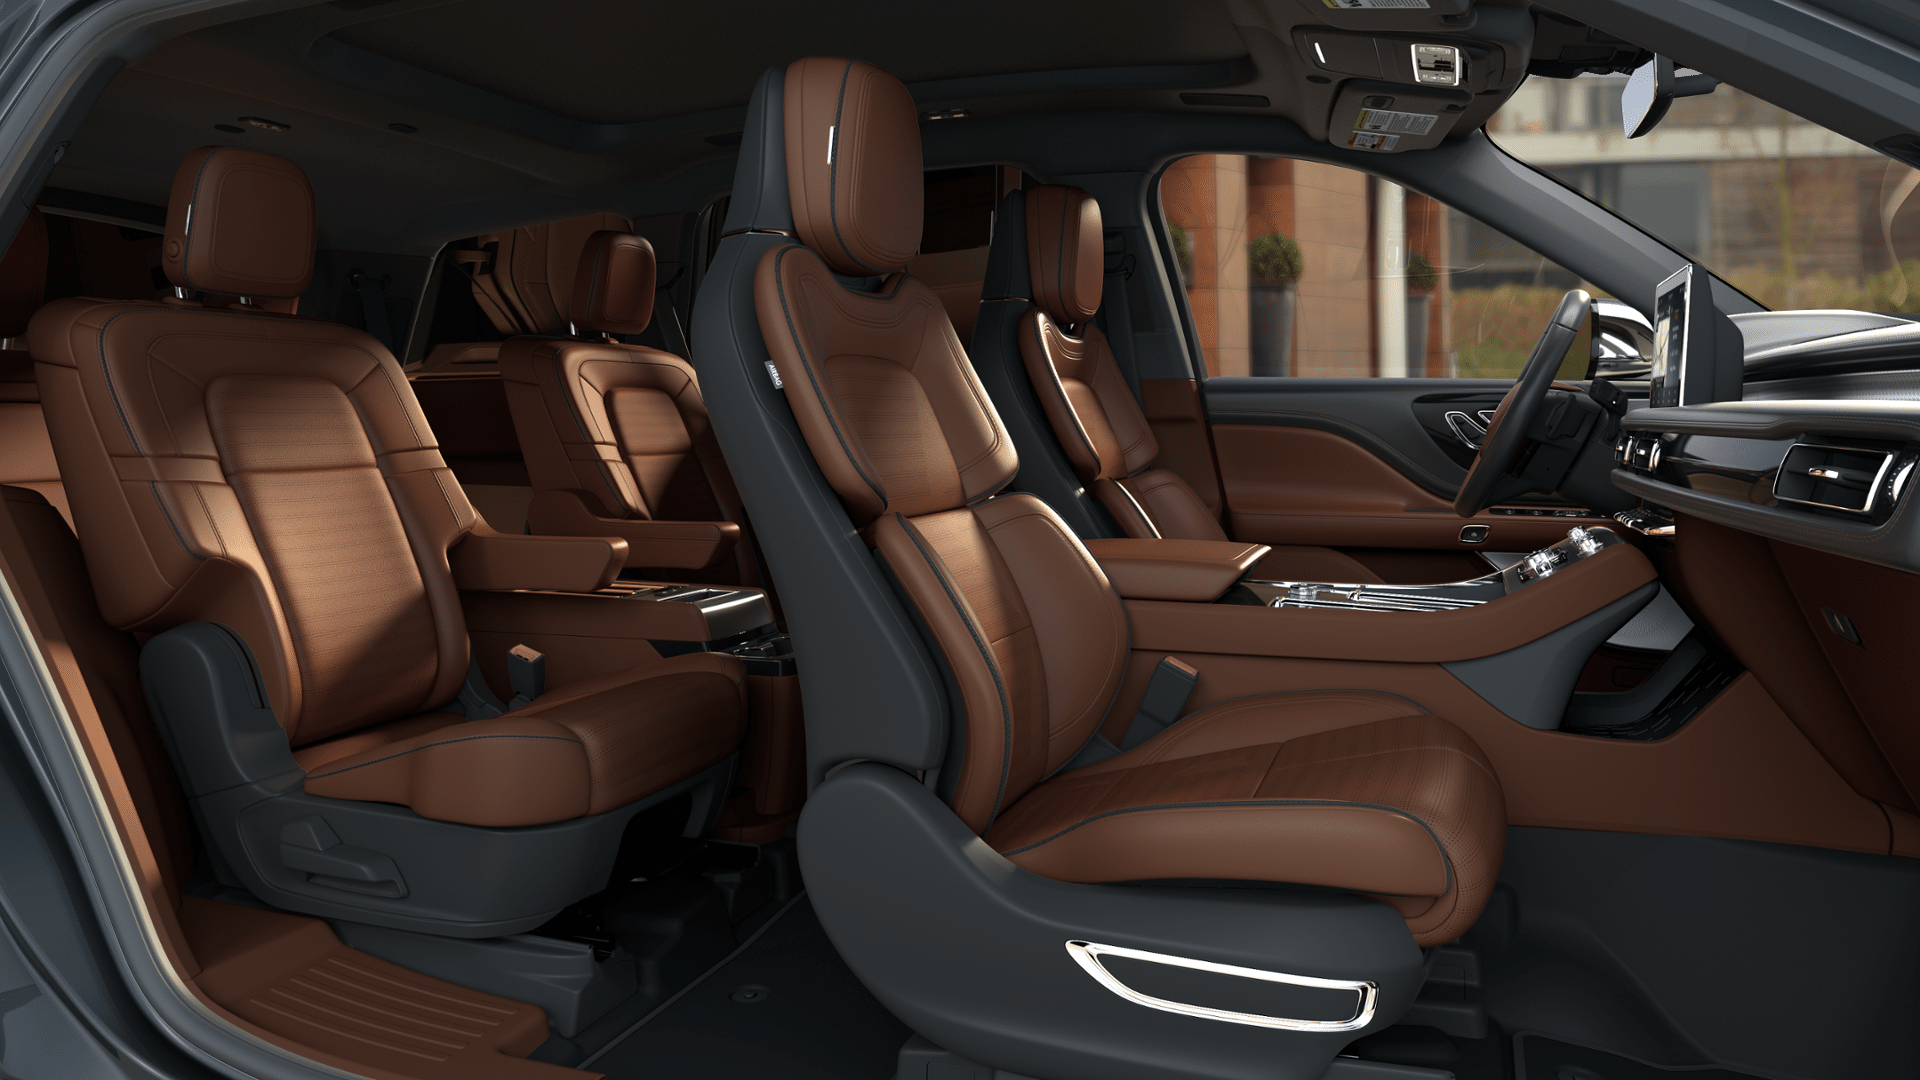 The Interiors Of The Lincoln Aviator